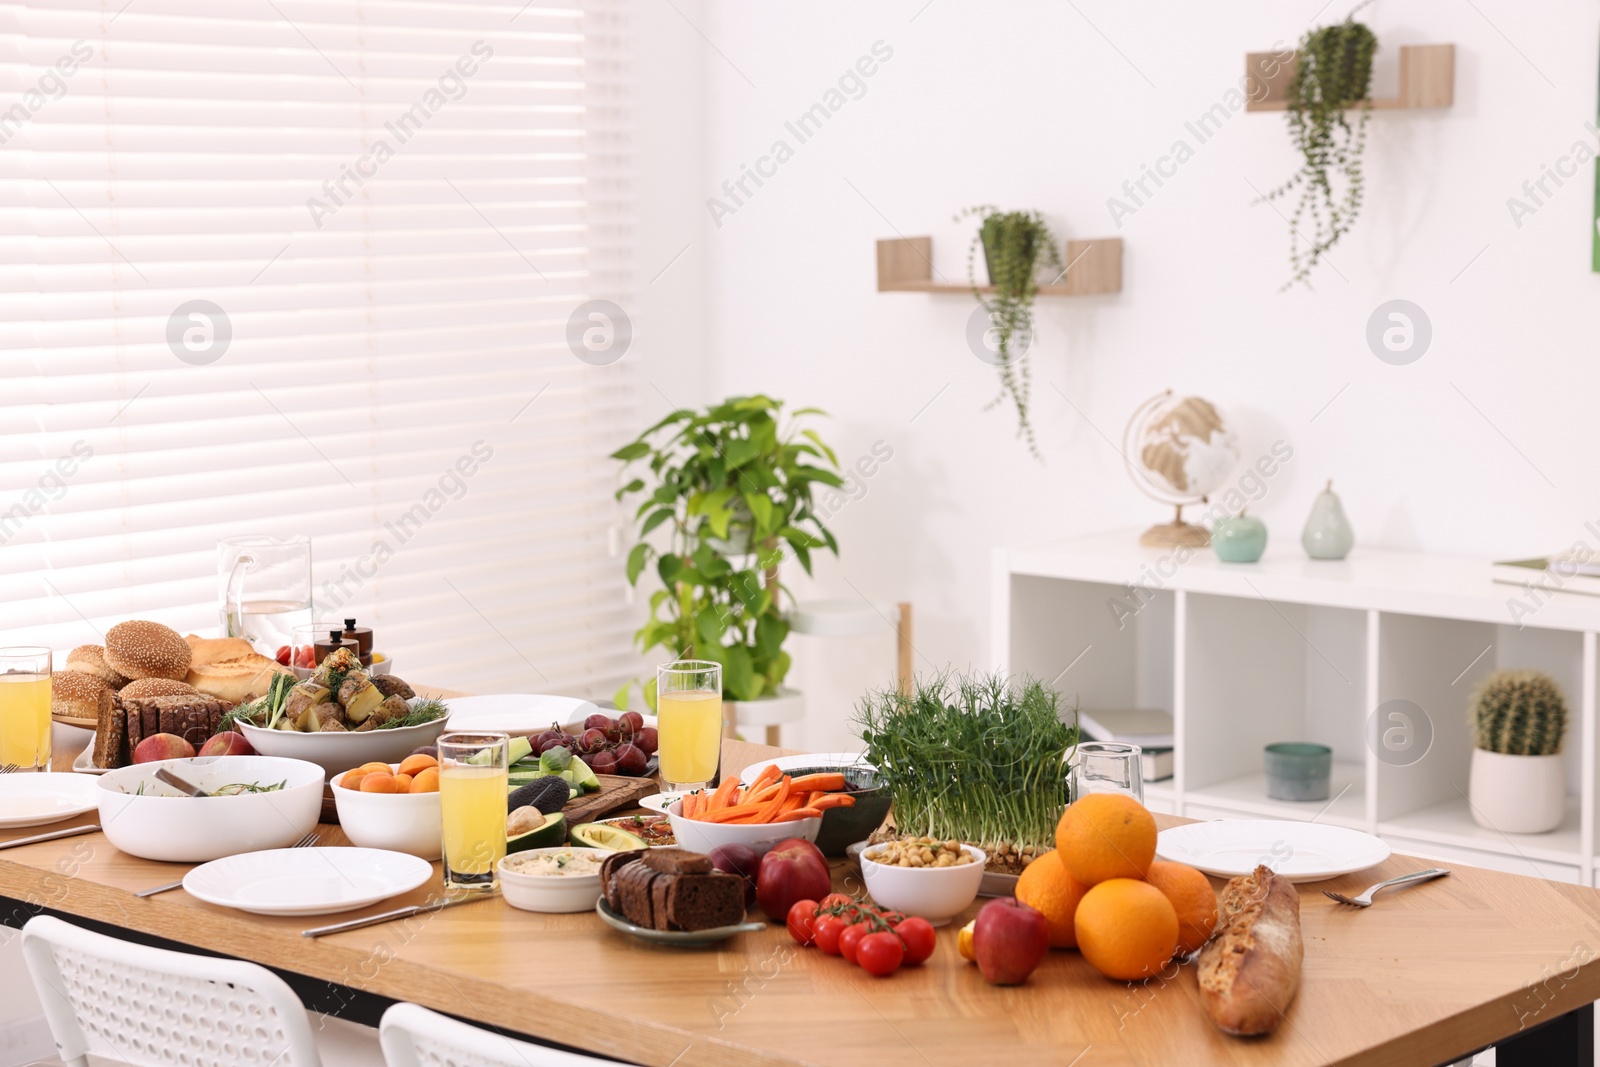 Photo of Healthy vegetarian food, glasses of juice, cutlery and plates on wooden table indoors